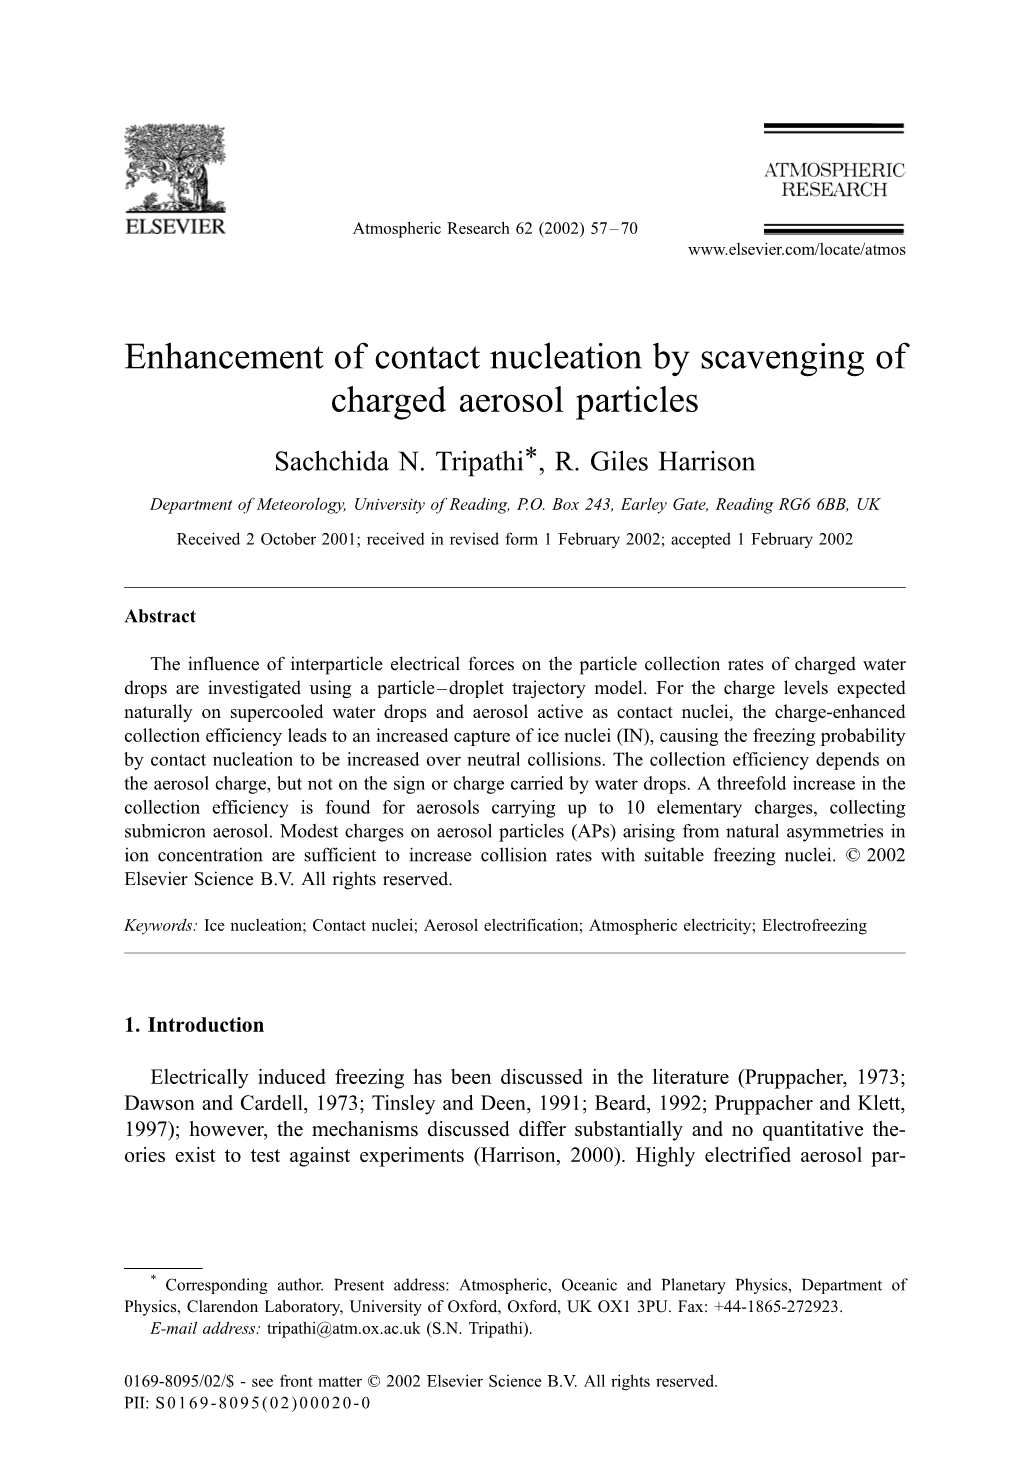 Enhancement of Contact Nucleation by Scavenging of Charged Aerosol Particles